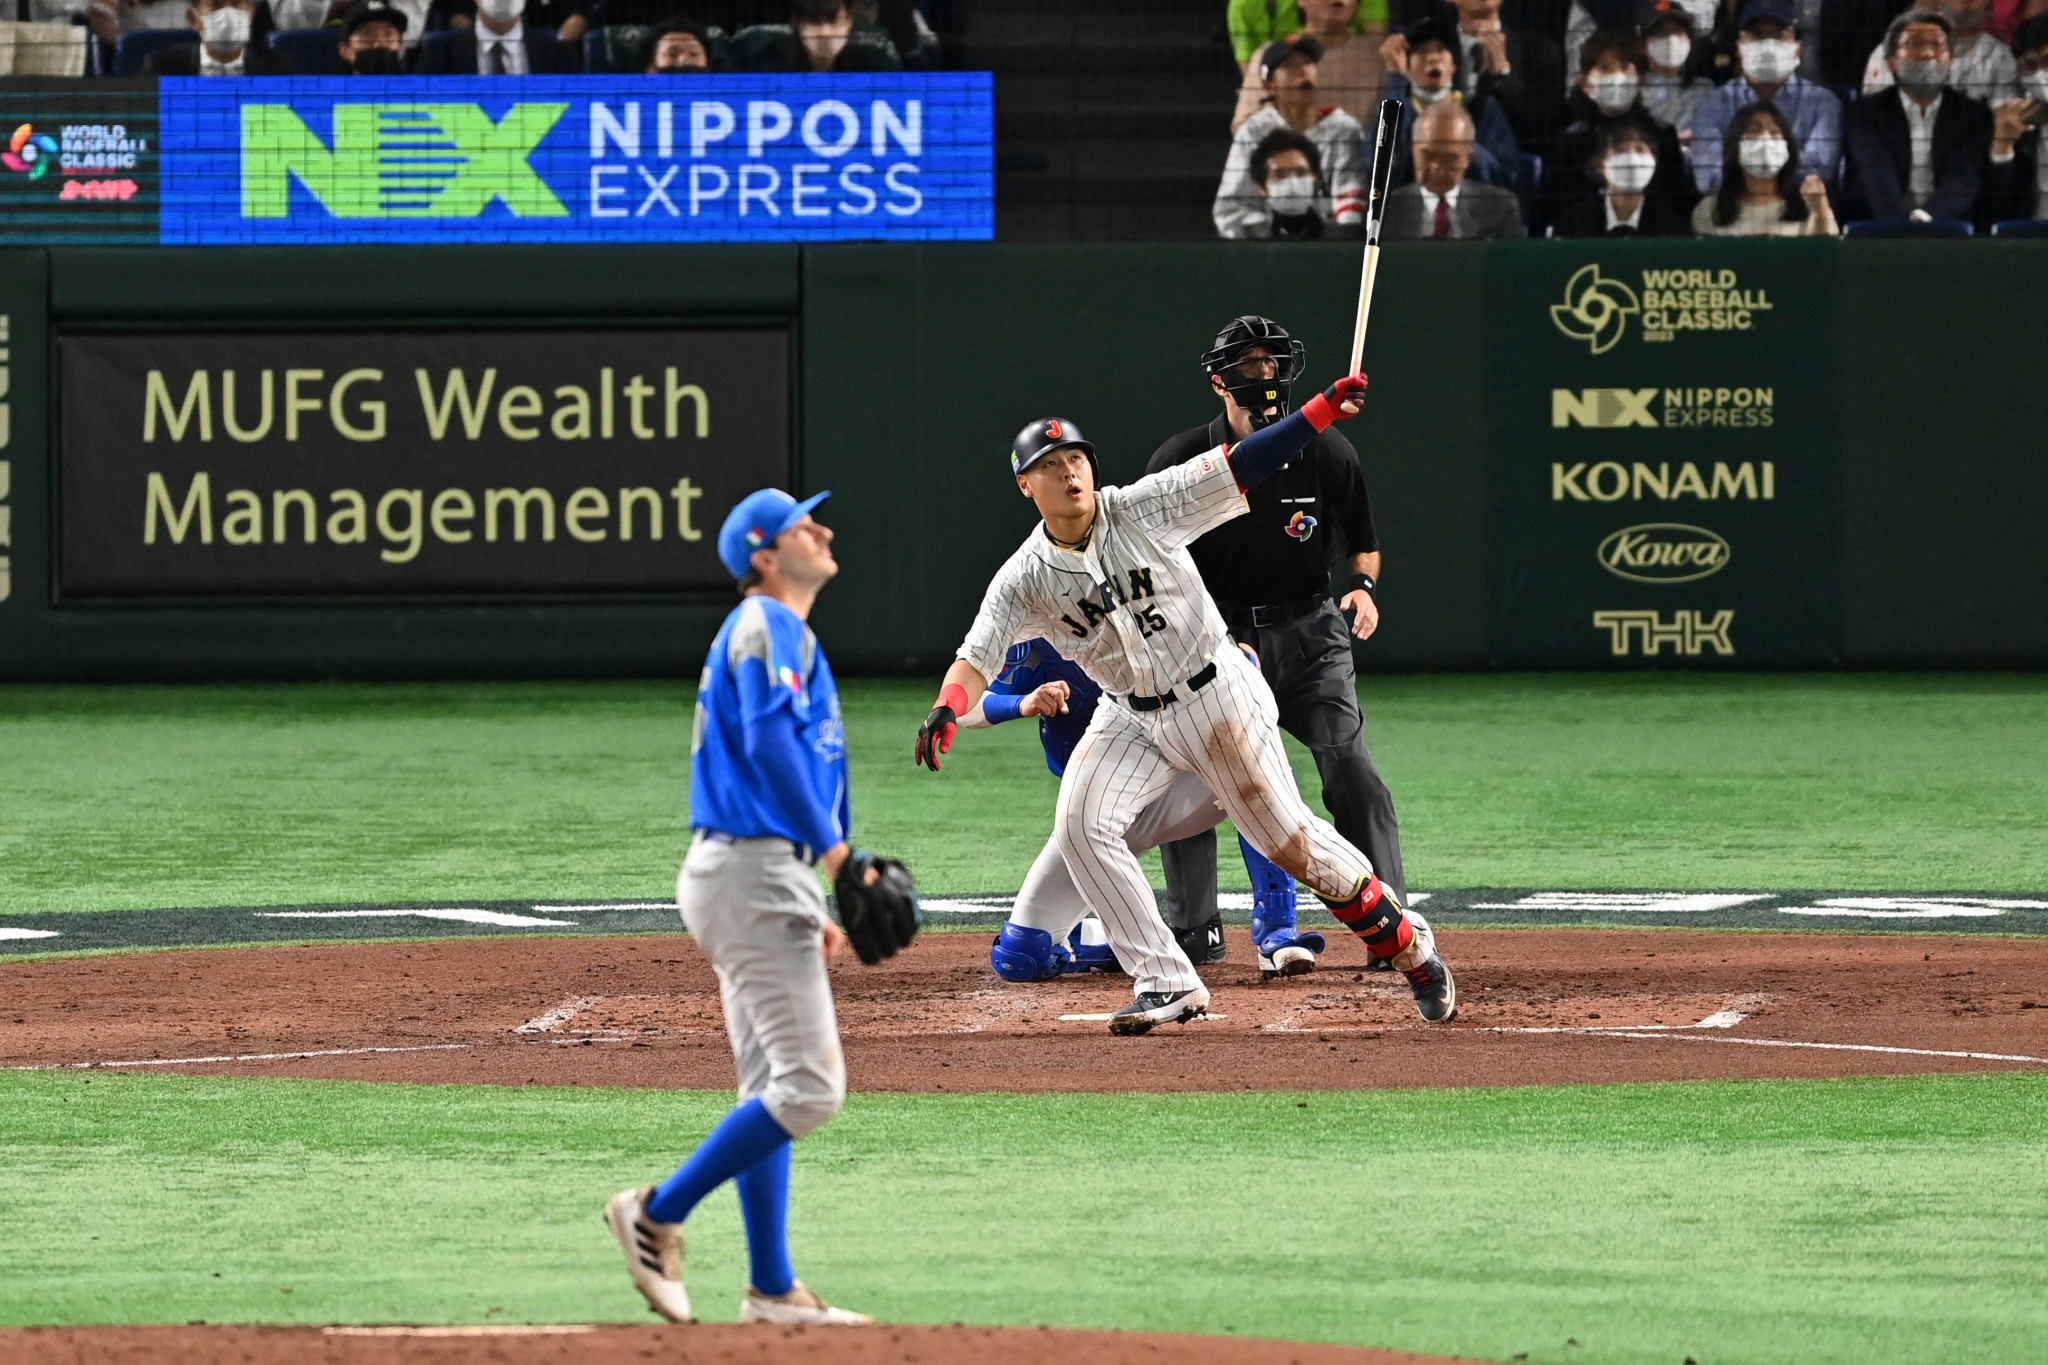 Japan and Mexico to face off after securing quarter-final wins at World Baseball Classic